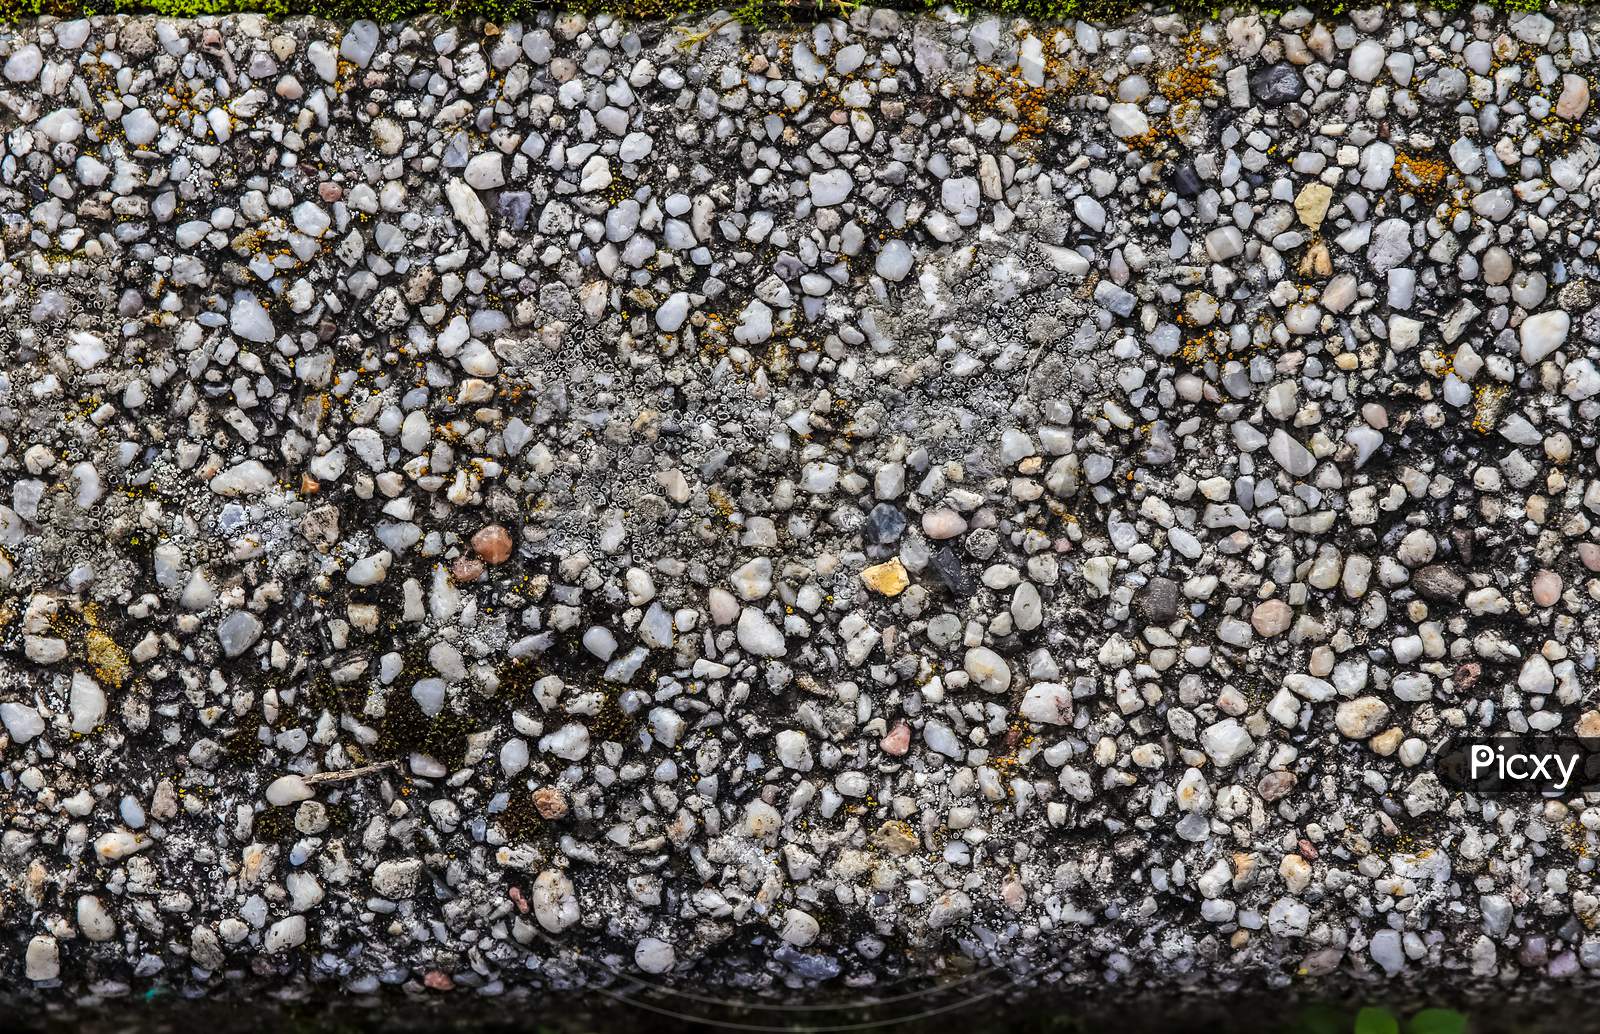 Detailed Close Up View On Pebbles And Stones On A Gravel Ground Texture